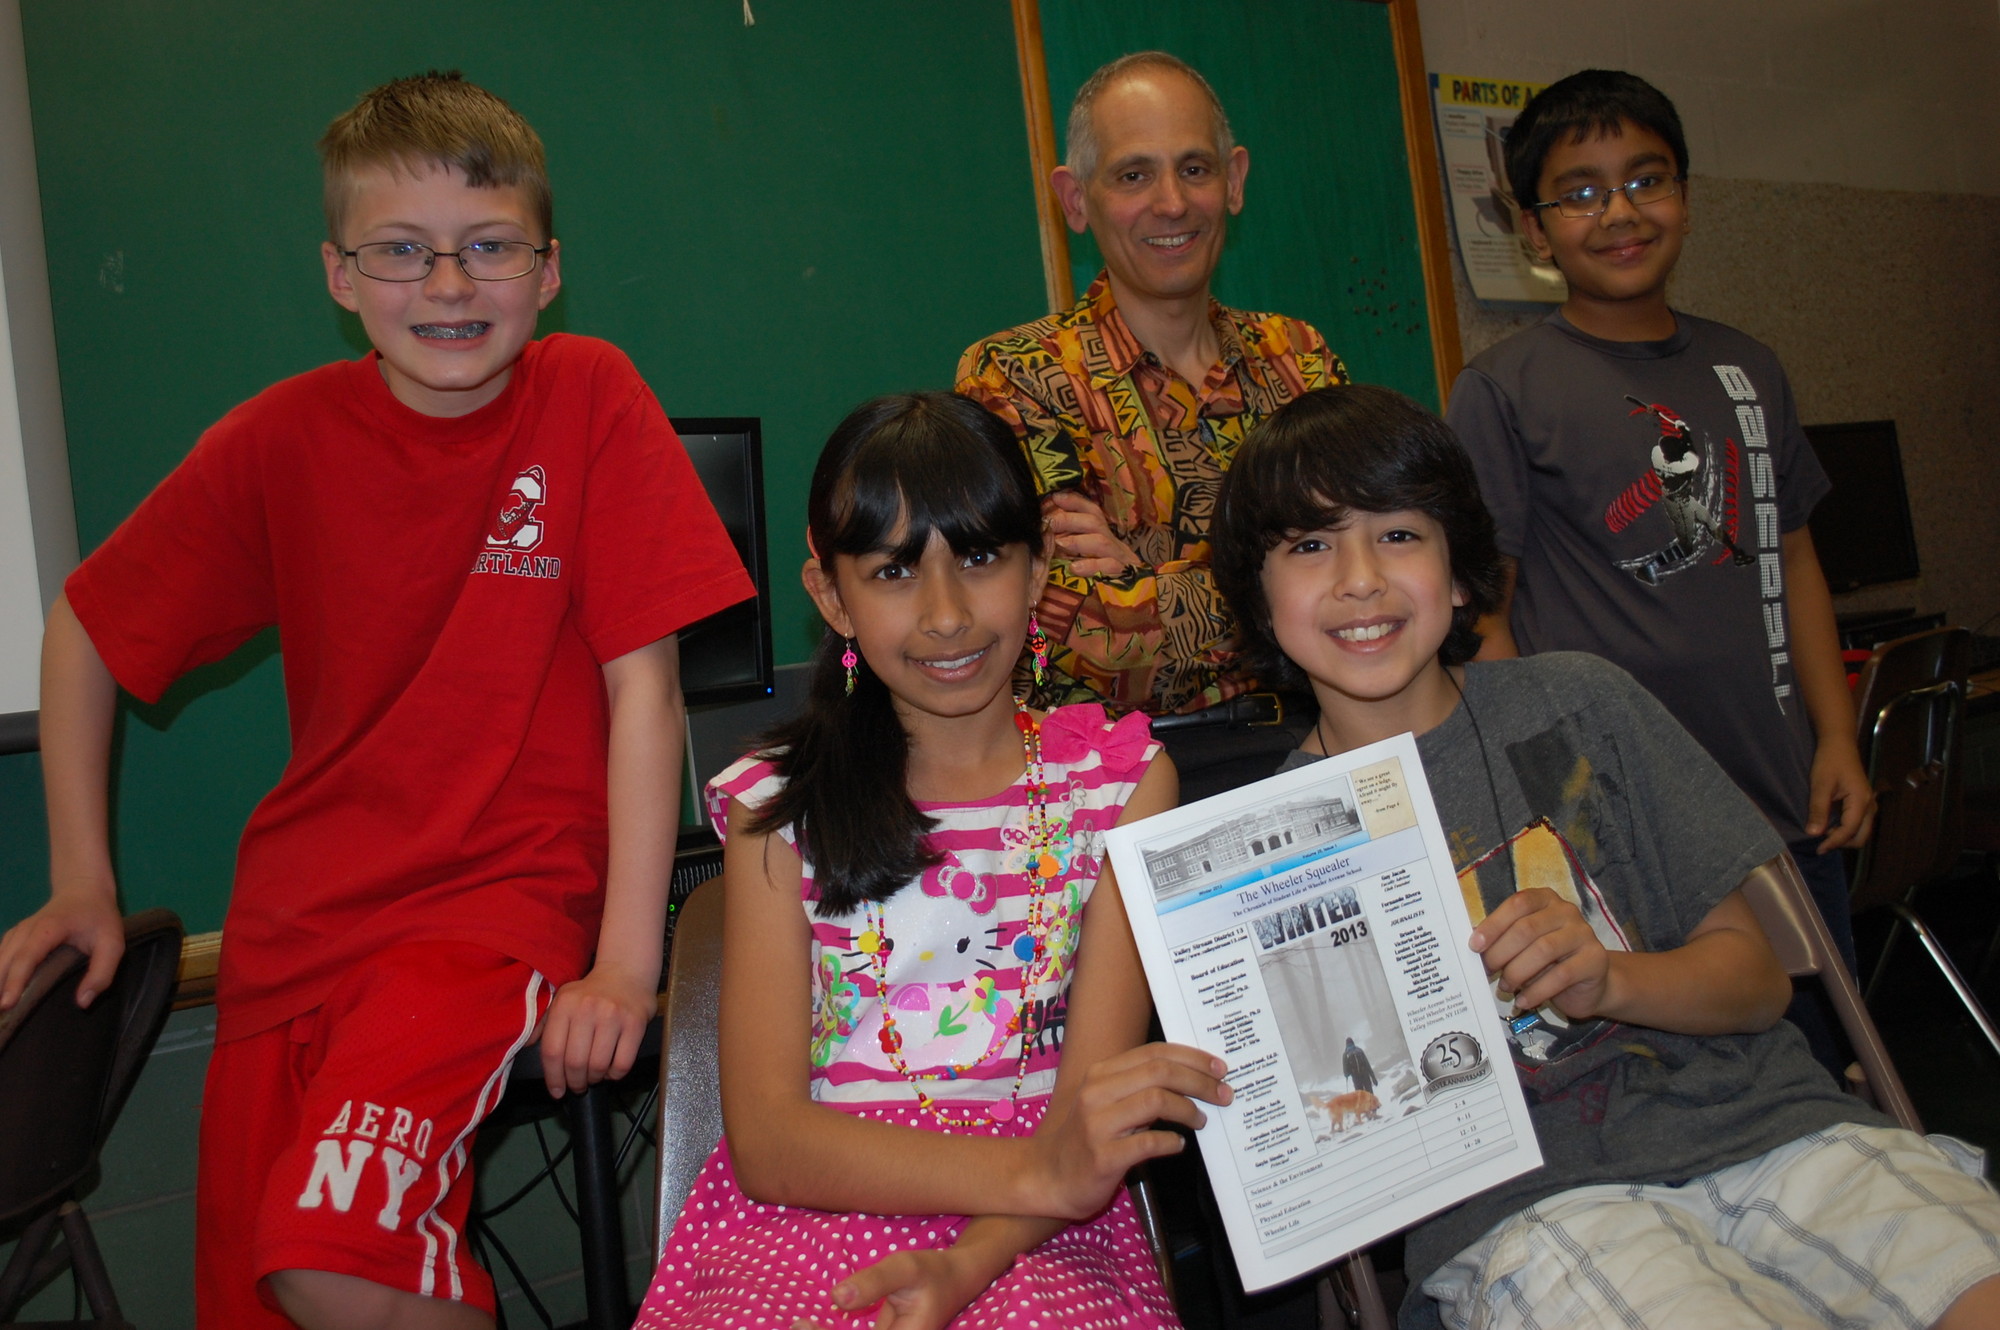 Wheeler Avenue School fifth-grader teacher Guy Jacob has been publishing the Wheeler Squealer for the pat 25 years. He is joined by members of this year’s reporting staff, from left, Michael Ott, Solani Dutt, Vito Oliveri and Jonathan Prashad.